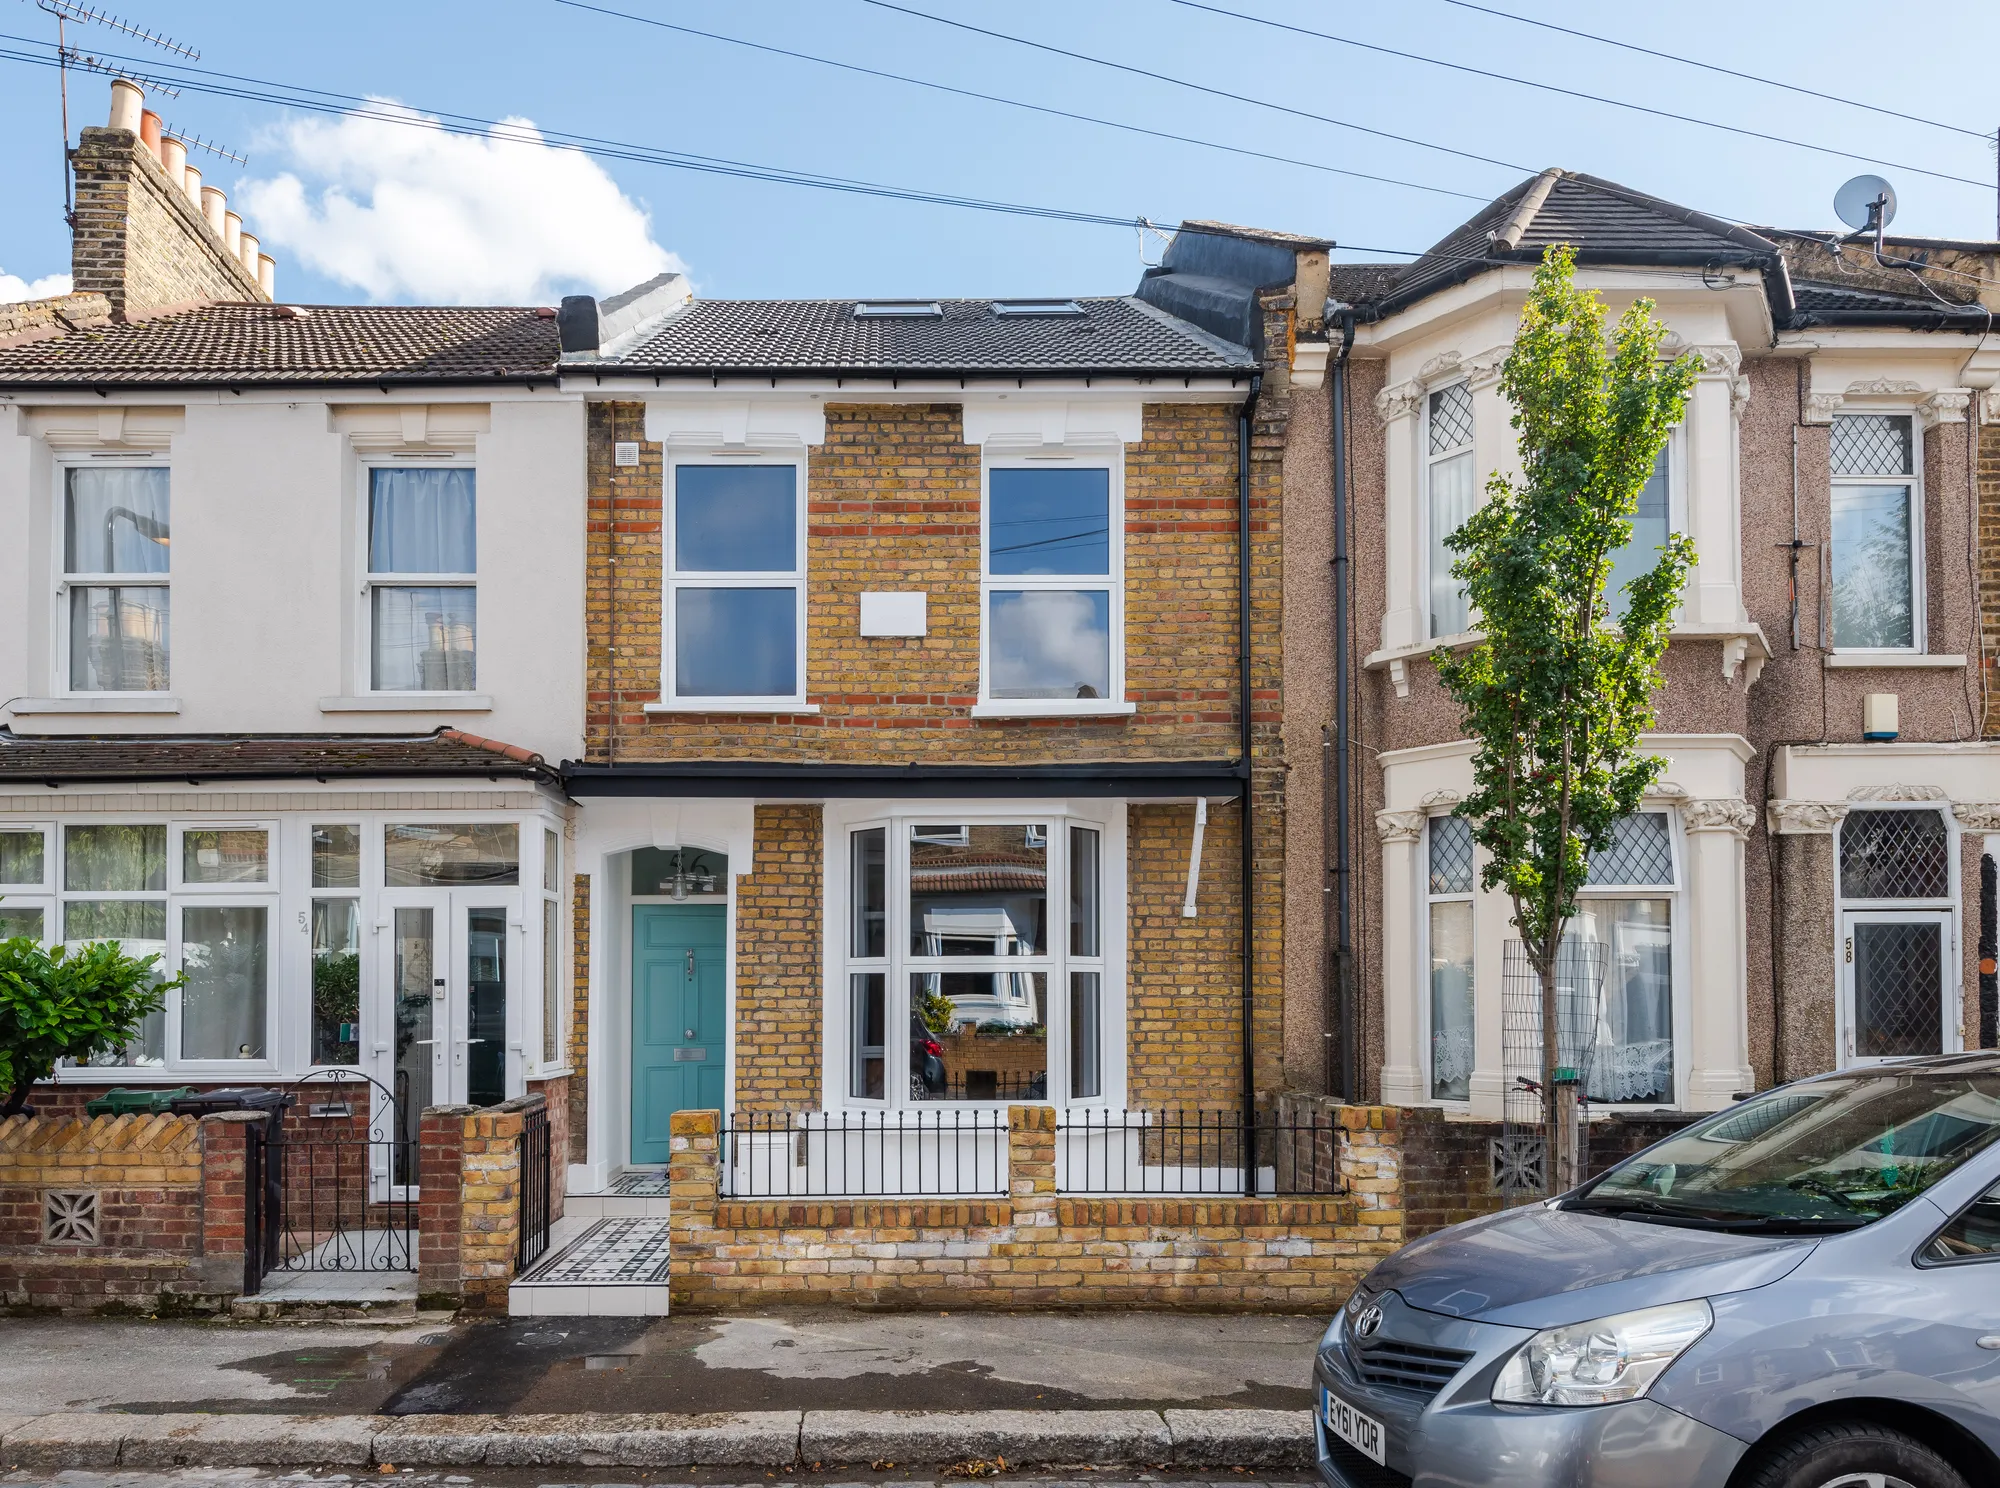 4 bed mid-terraced house for sale in Park Grove Road, Leytonstone - Property Image 1